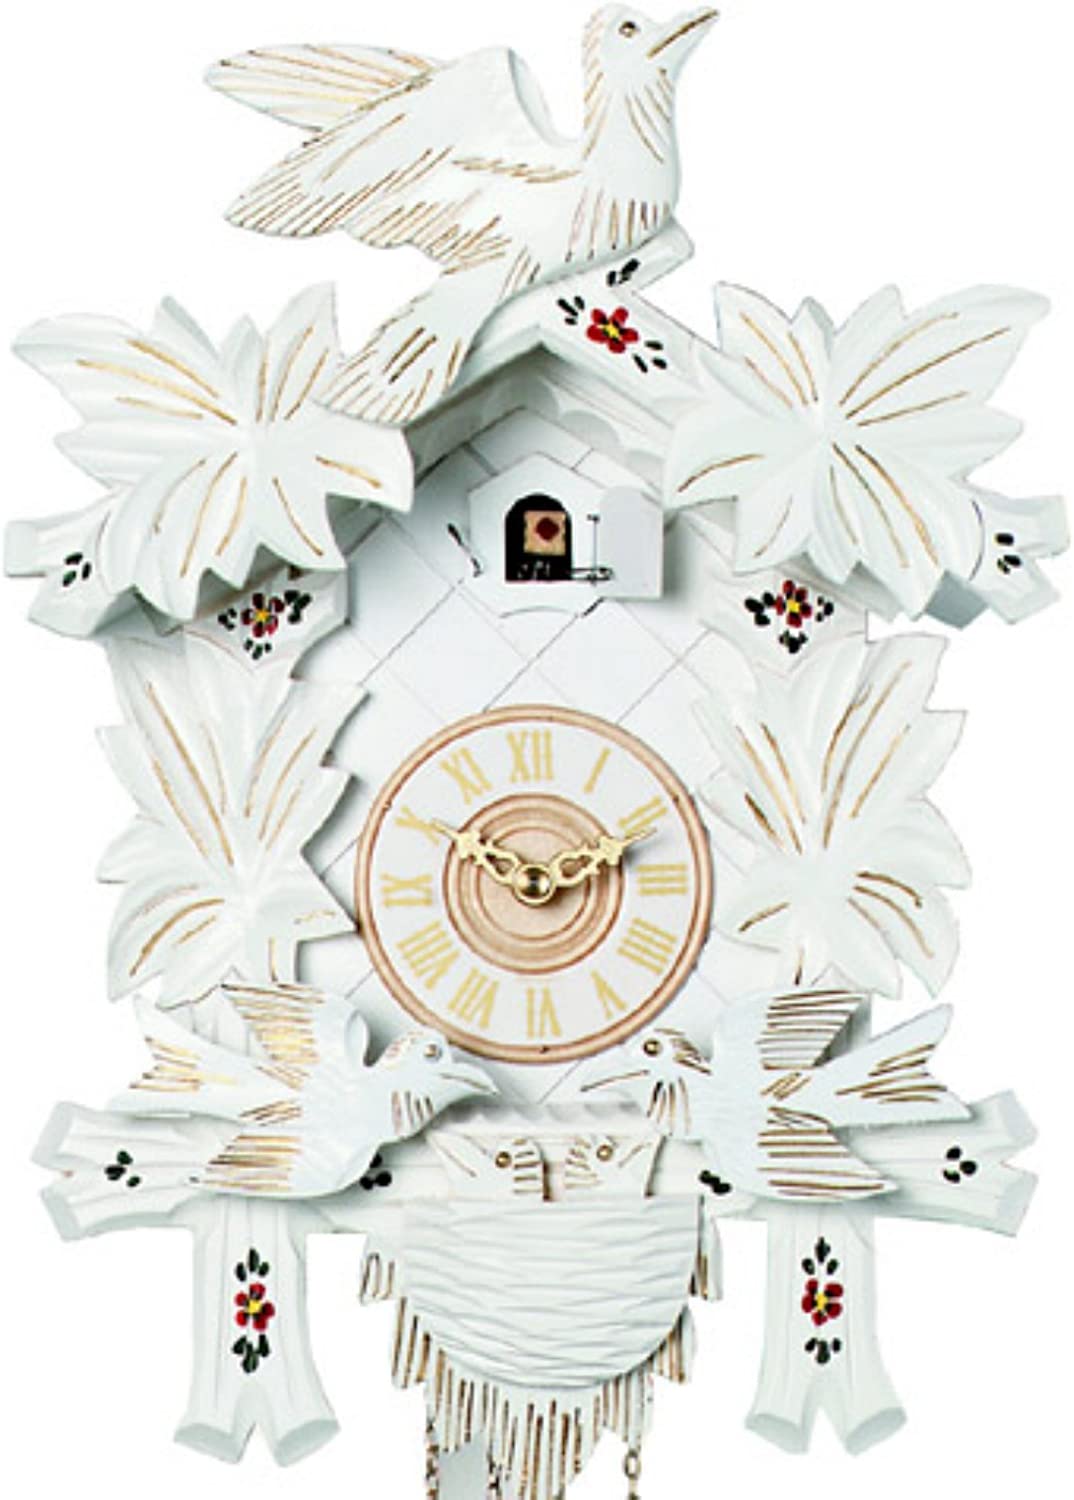 River City Clocks One Day Cuckoo Clock with Carved Maple Leaves & Moving Birds - White with Gold Accents